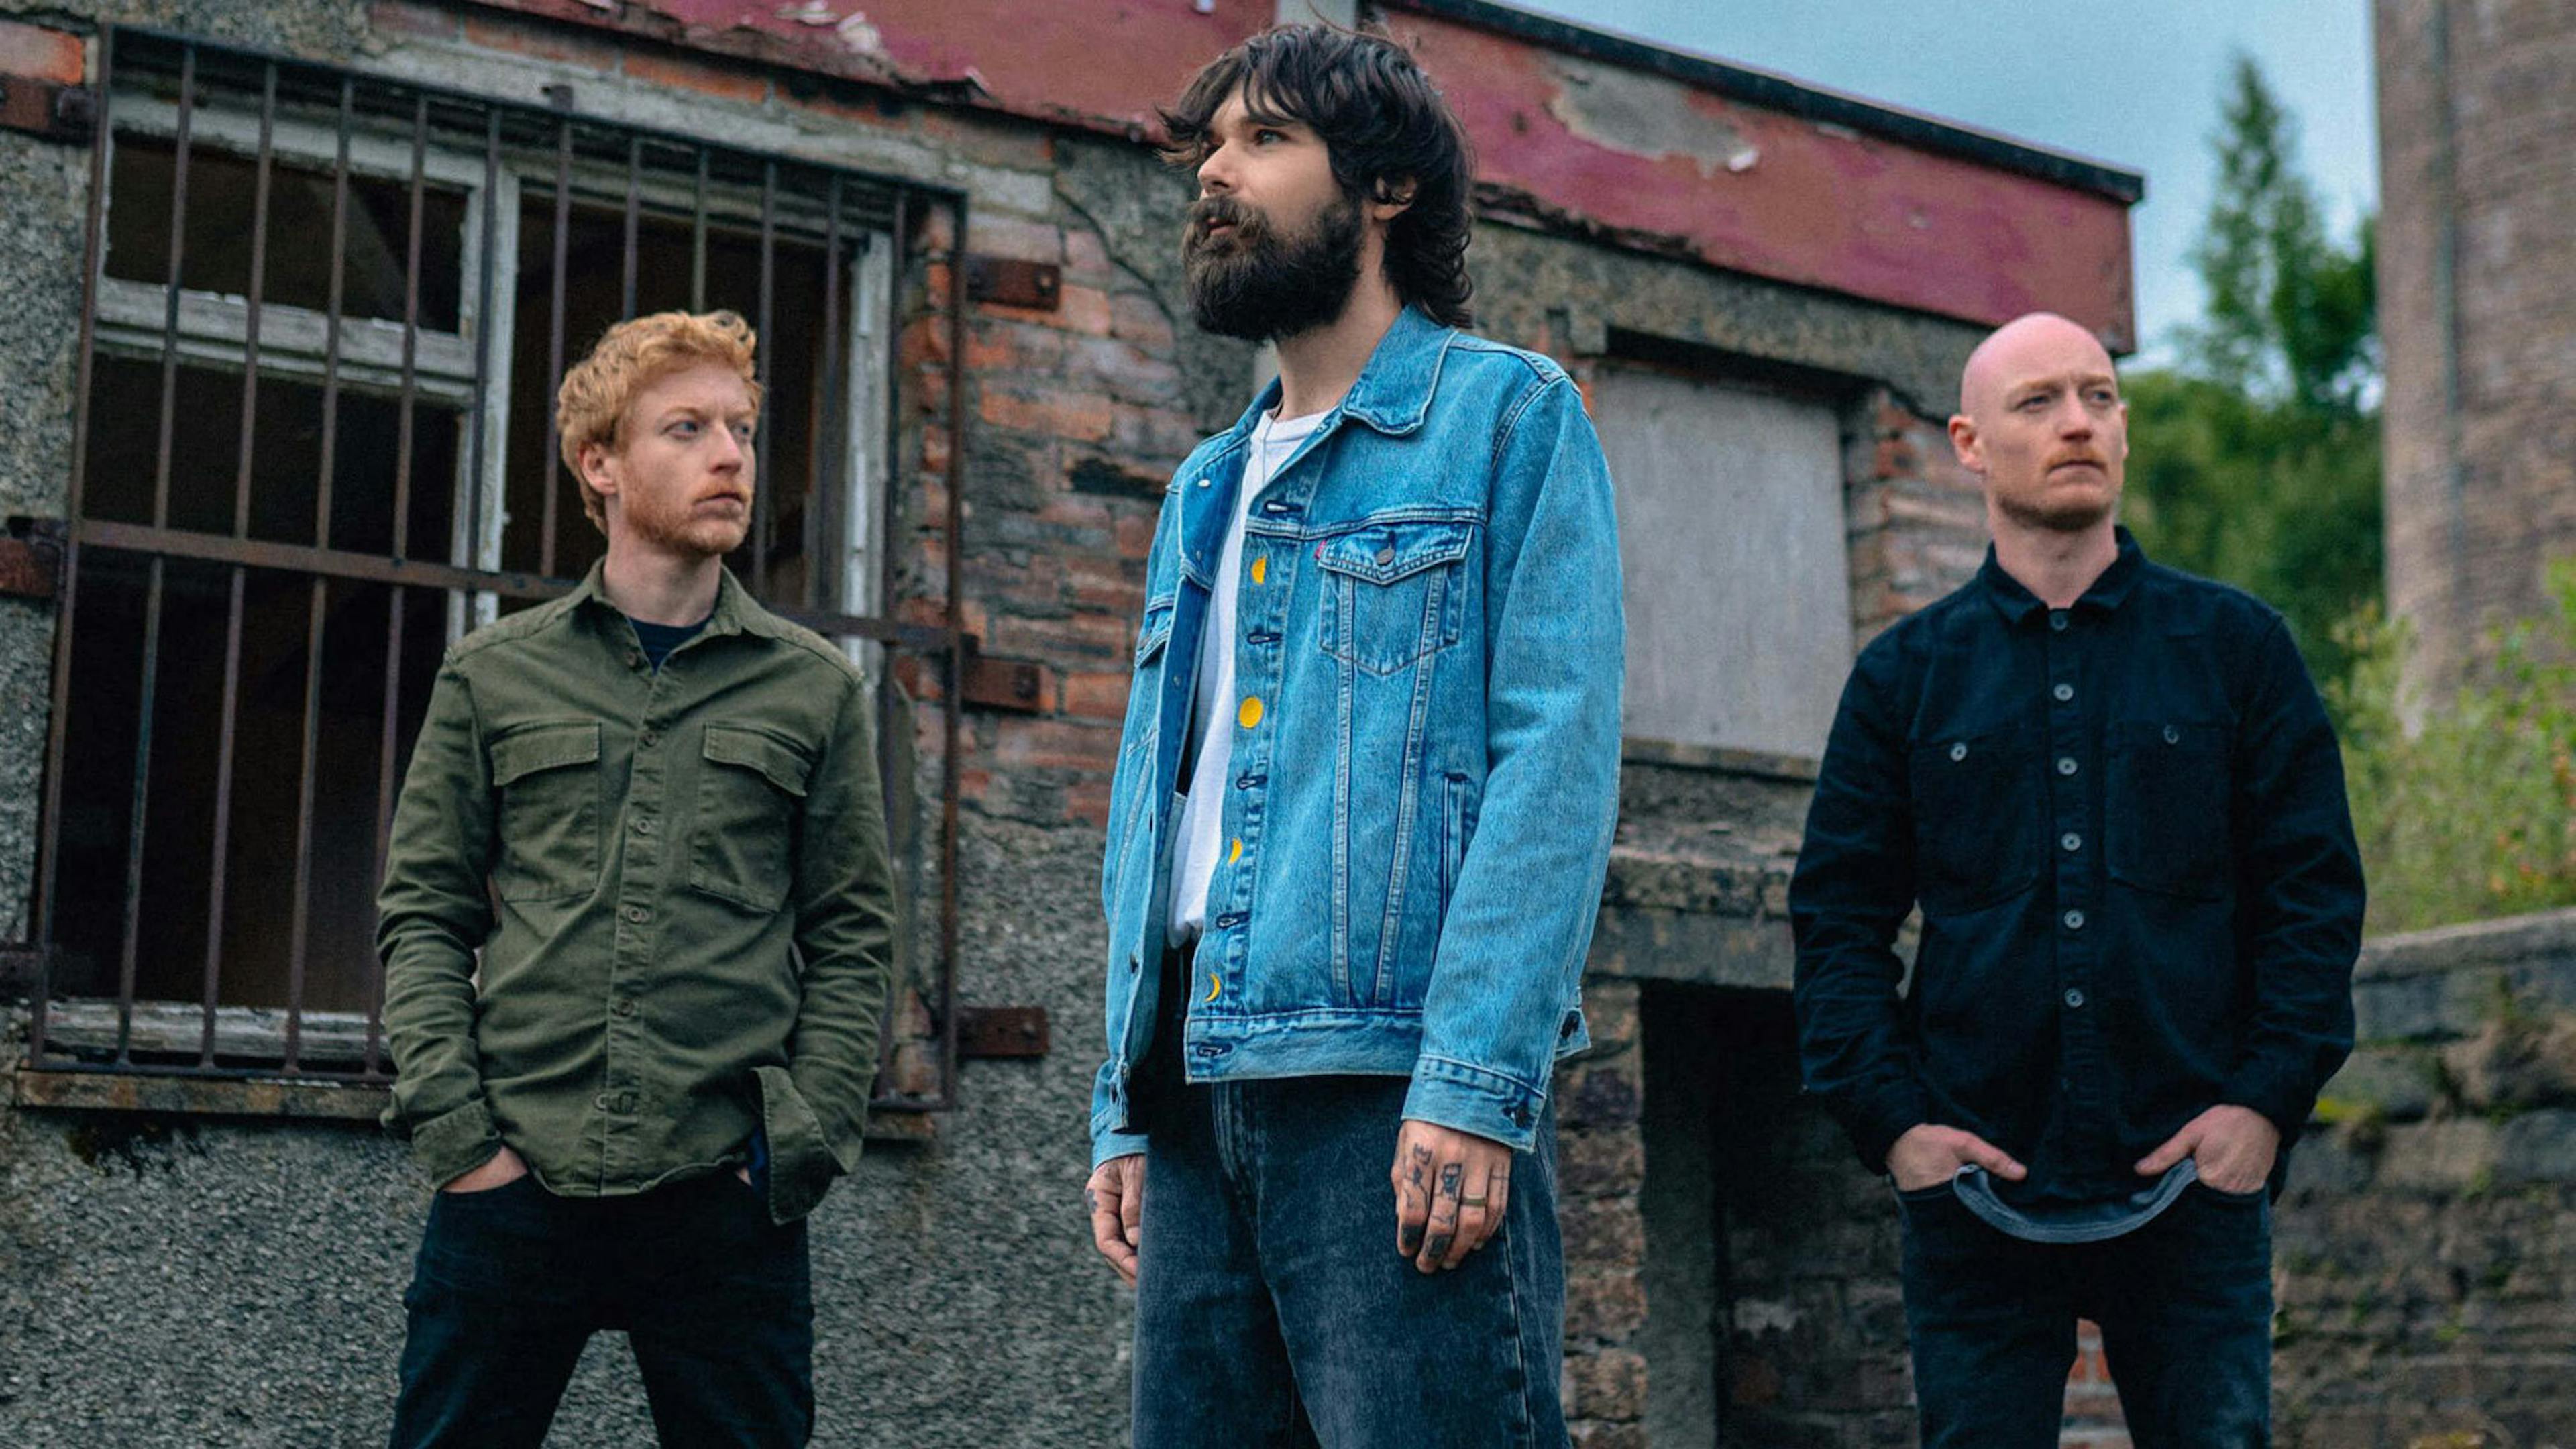 Biffy Clyro are playing an open-air summer gig with Witch Fever